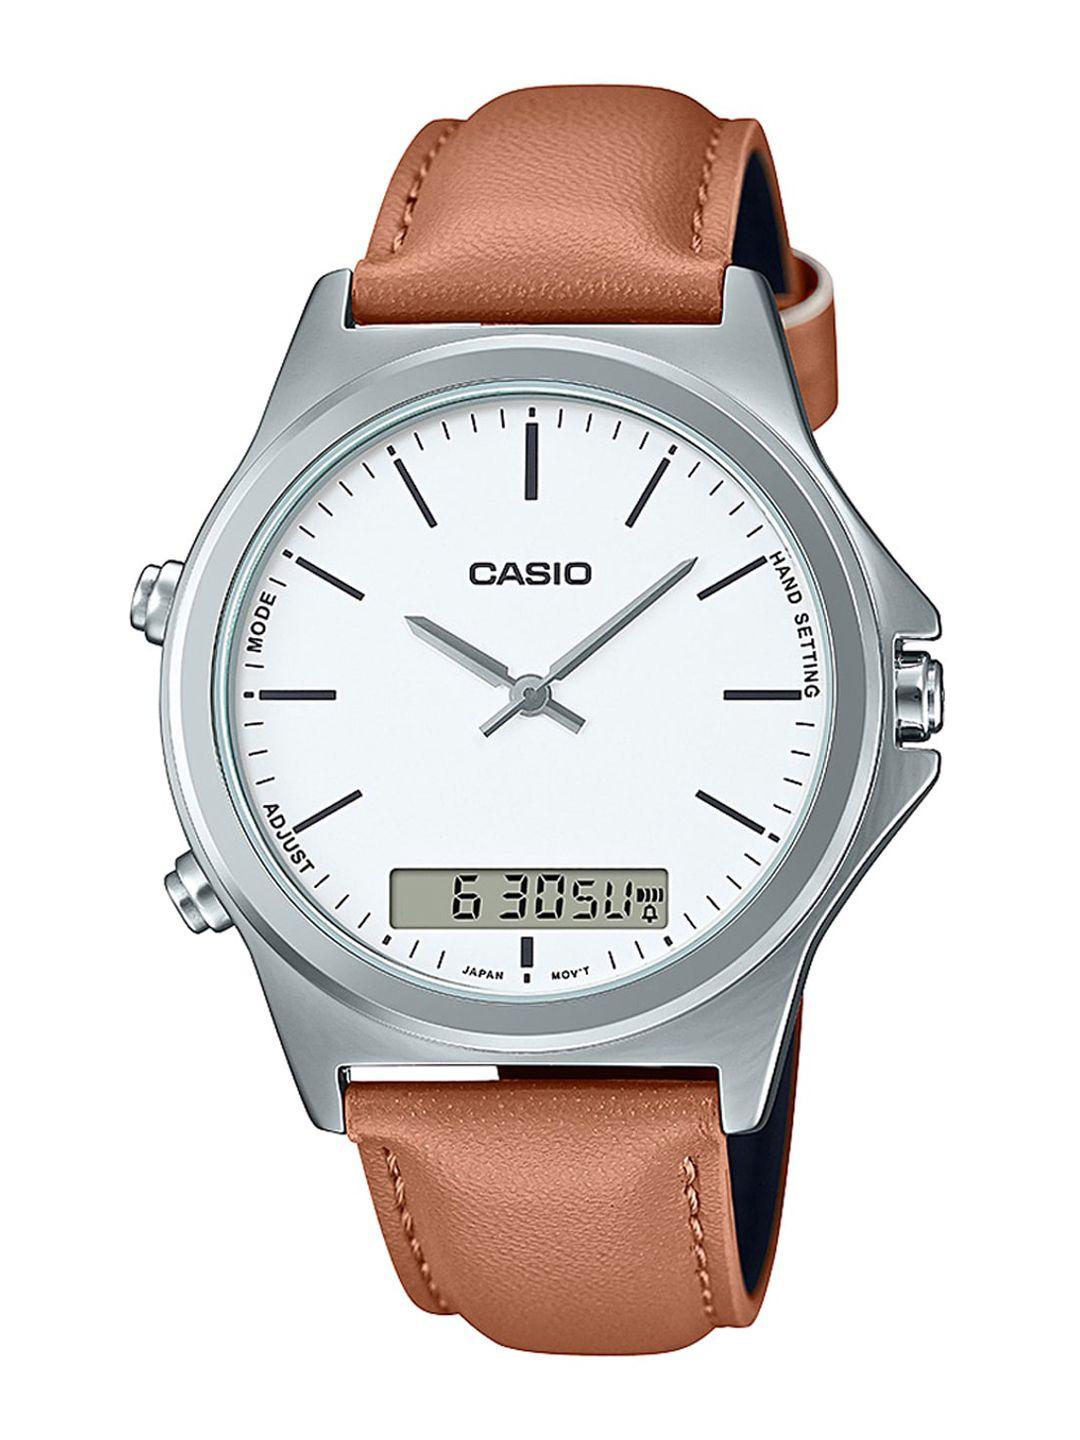 casio-men-white-dial-&-brown-leather-straps-analogue-watch